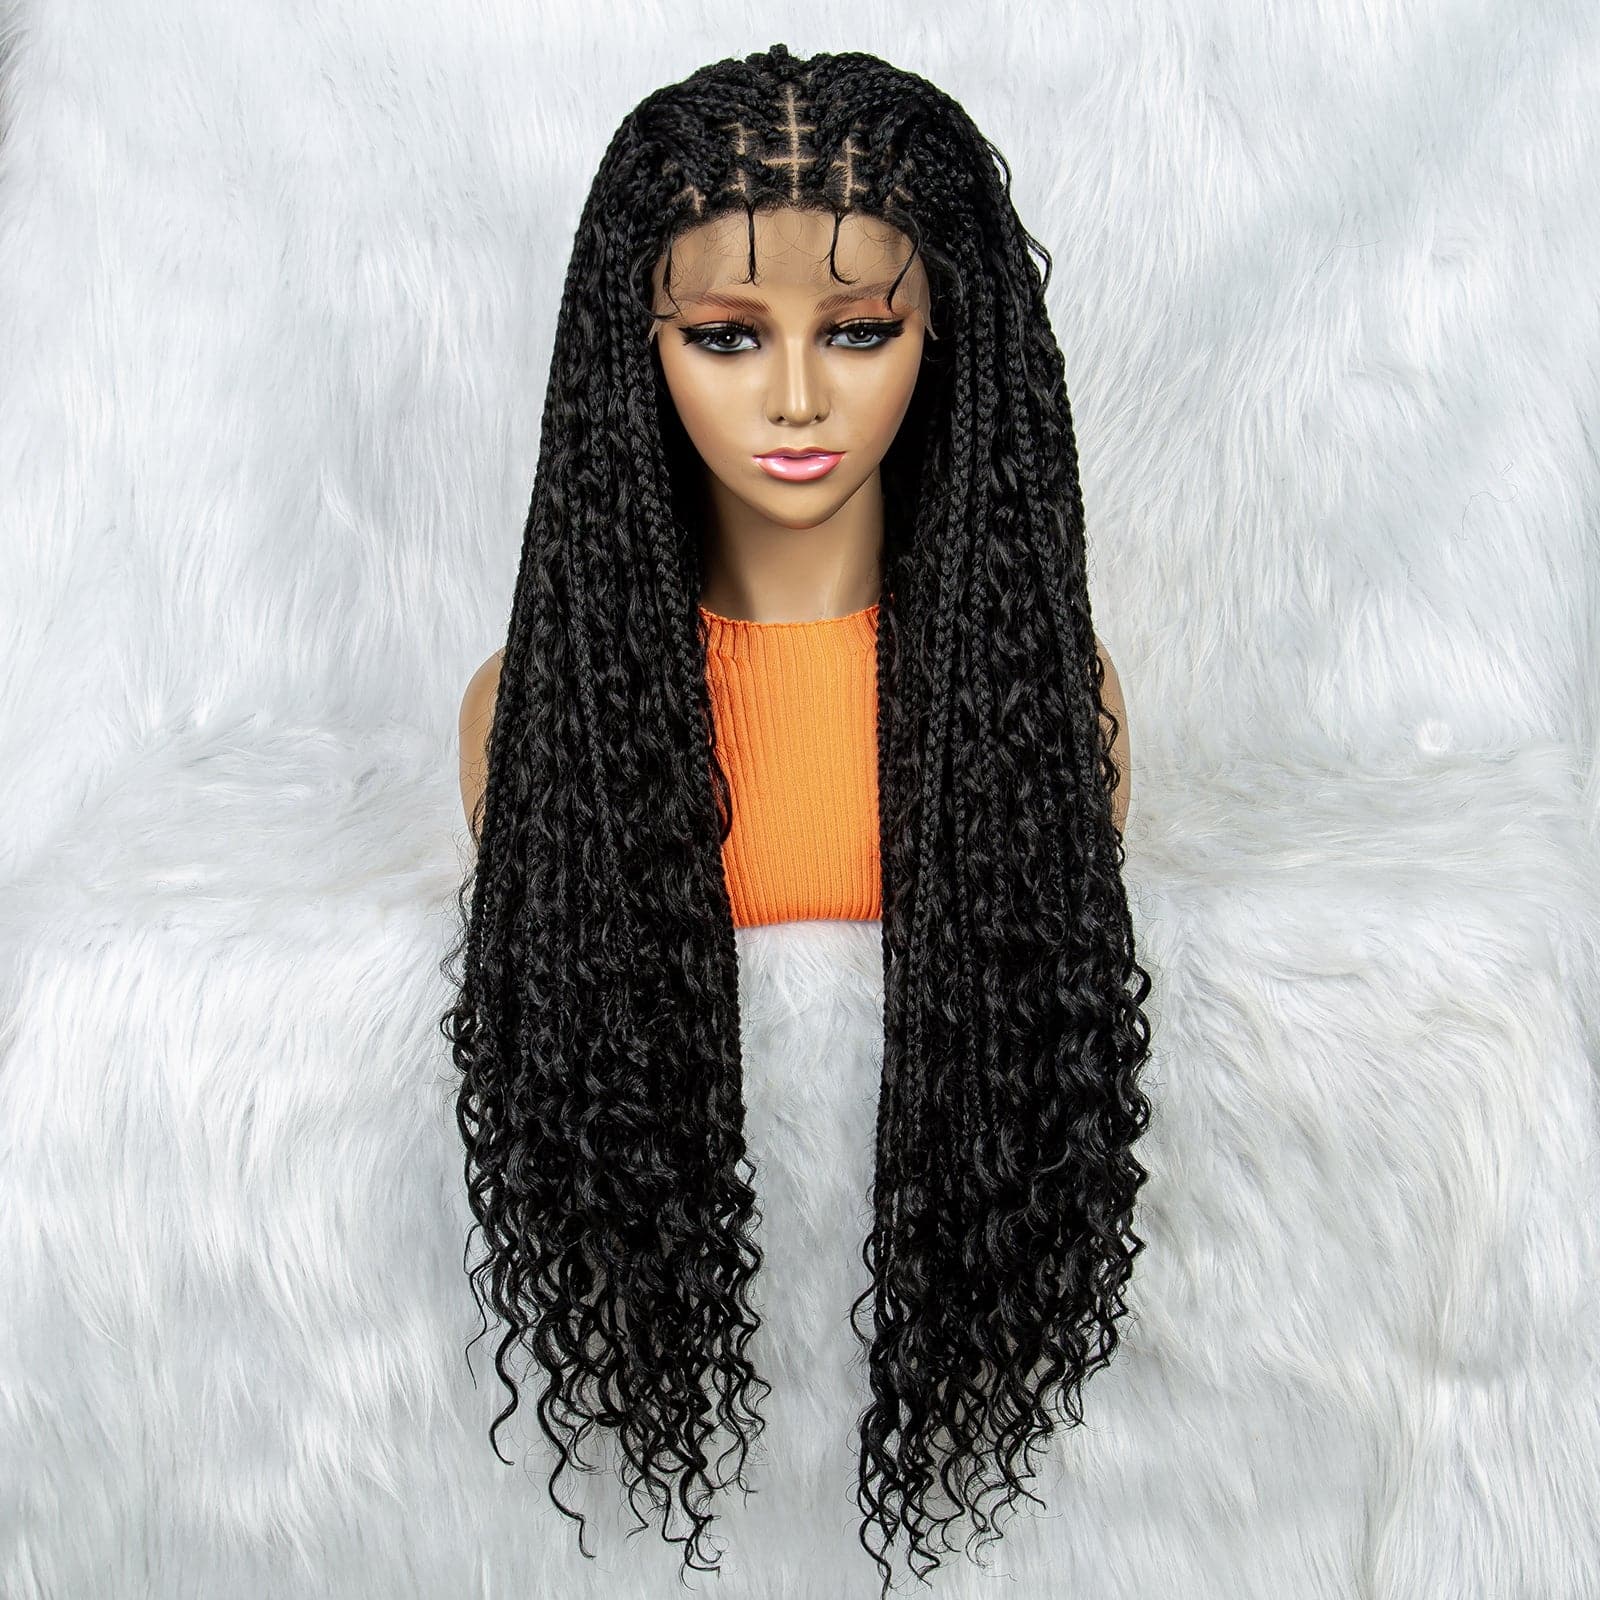 Anytime Synthetic Lace Braided Wigs Braids Lace Wigs for Black Women Box Braids Lace Wig